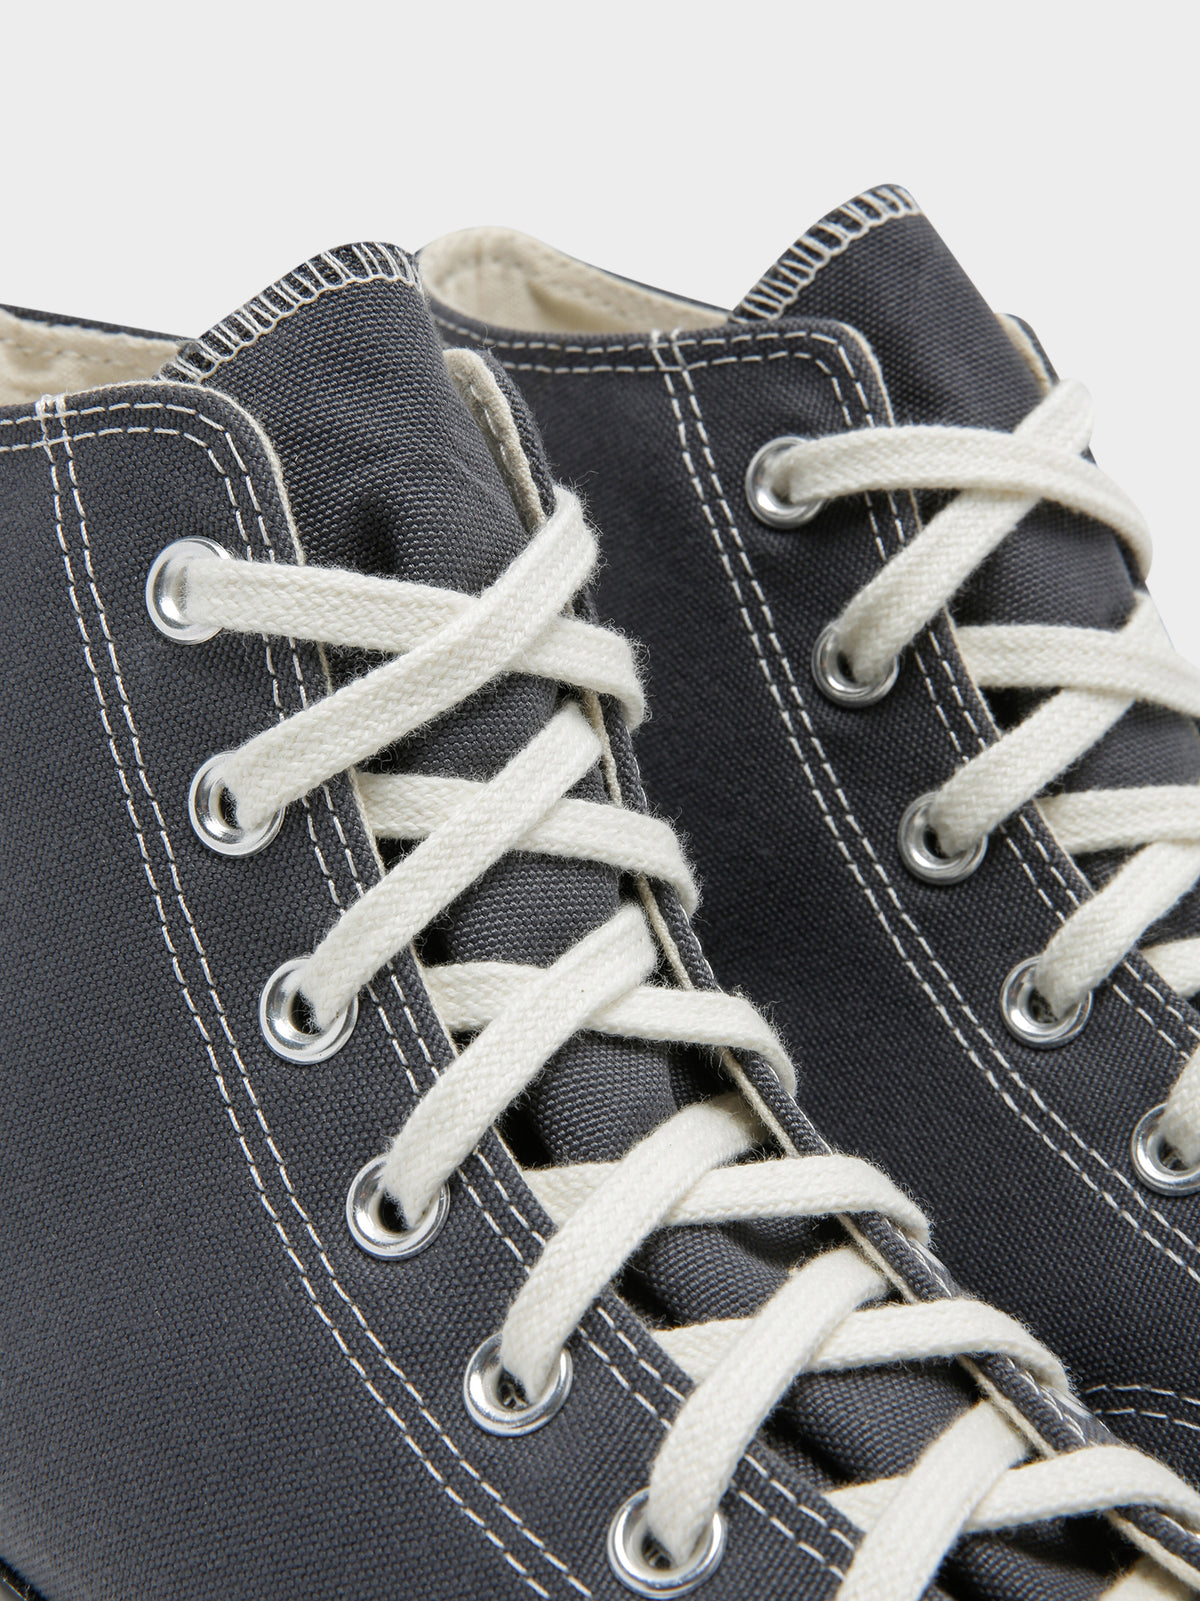 Unisex Chuck 70 High Sneakers in Iron Grey